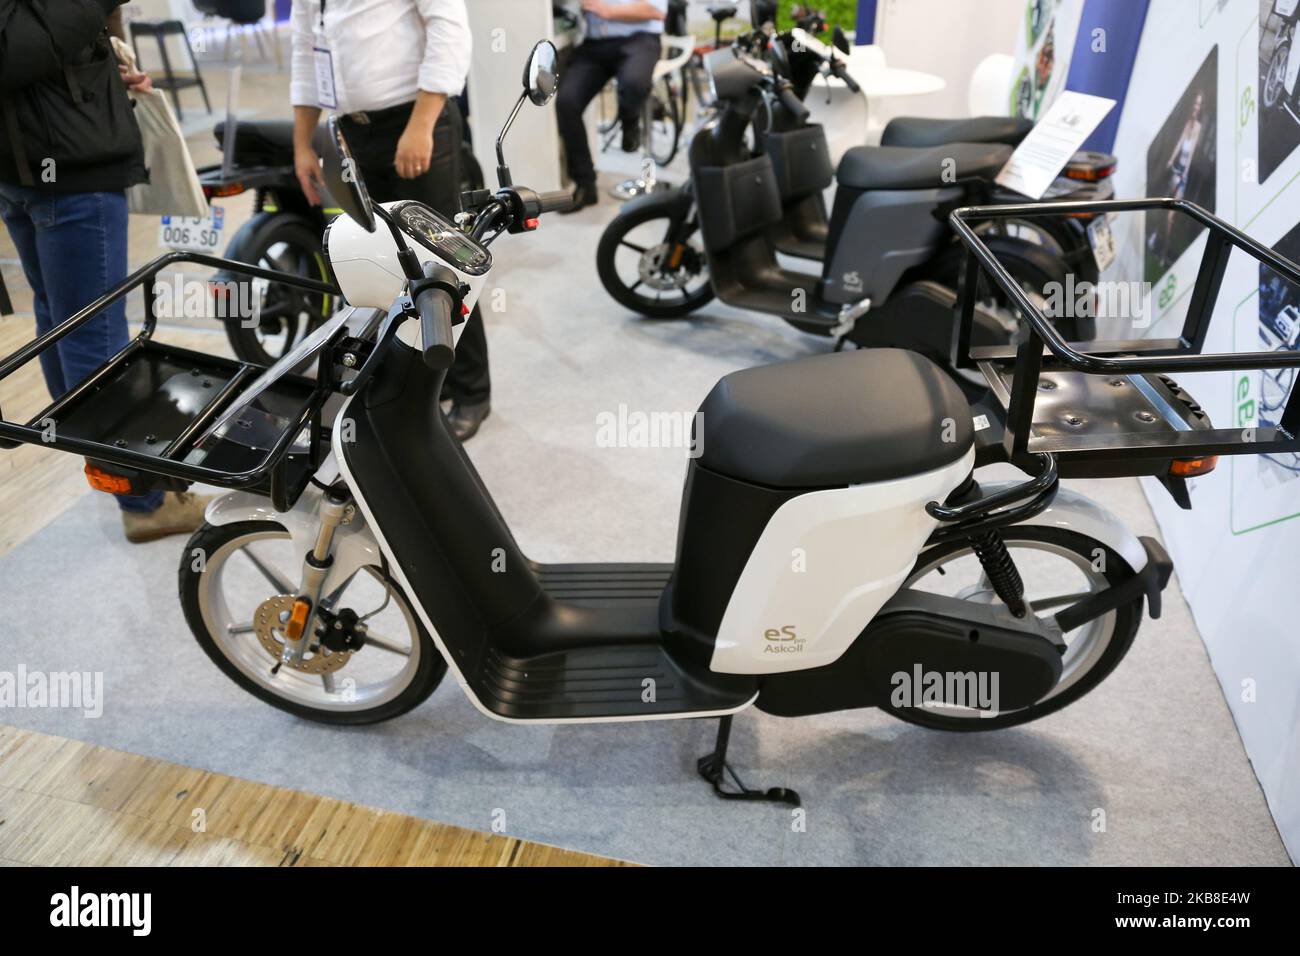 The Italian manufacturer Askoll exhibits an electric scooter eS pro at the Autonomy and Urban Mobility show, in Paris on October 16, 2019. (Photo by Michel Stoupak/NurPhoto) Stock Photo